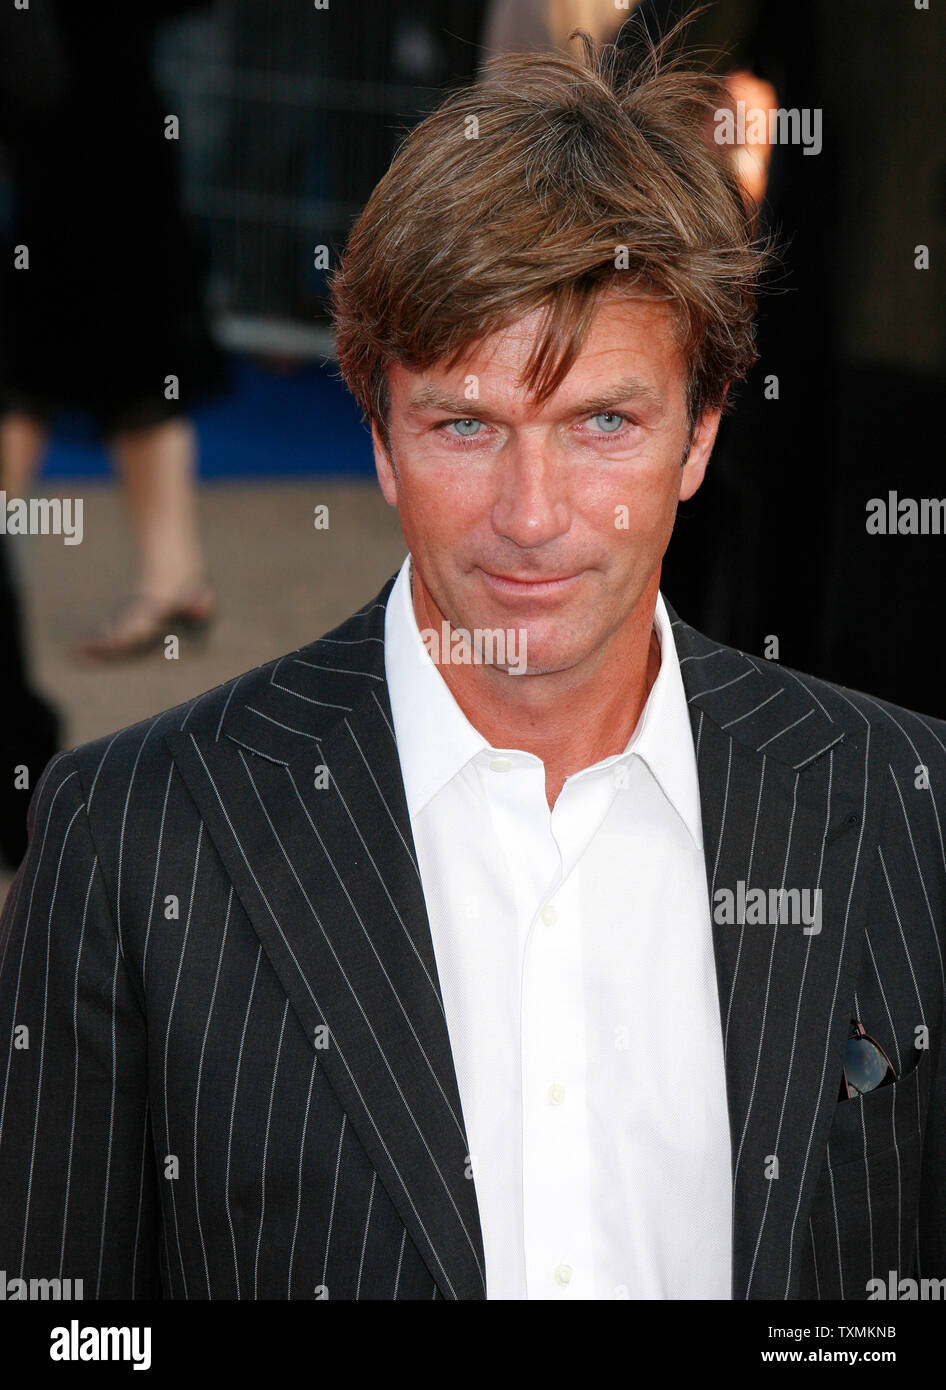 French actor Philippe Caroit arrives on the red carpet before a screening  of the film "The Bourne Ultimatum" at the 33rd American Film Festival of  Deauville in Deauville, France on September 1,